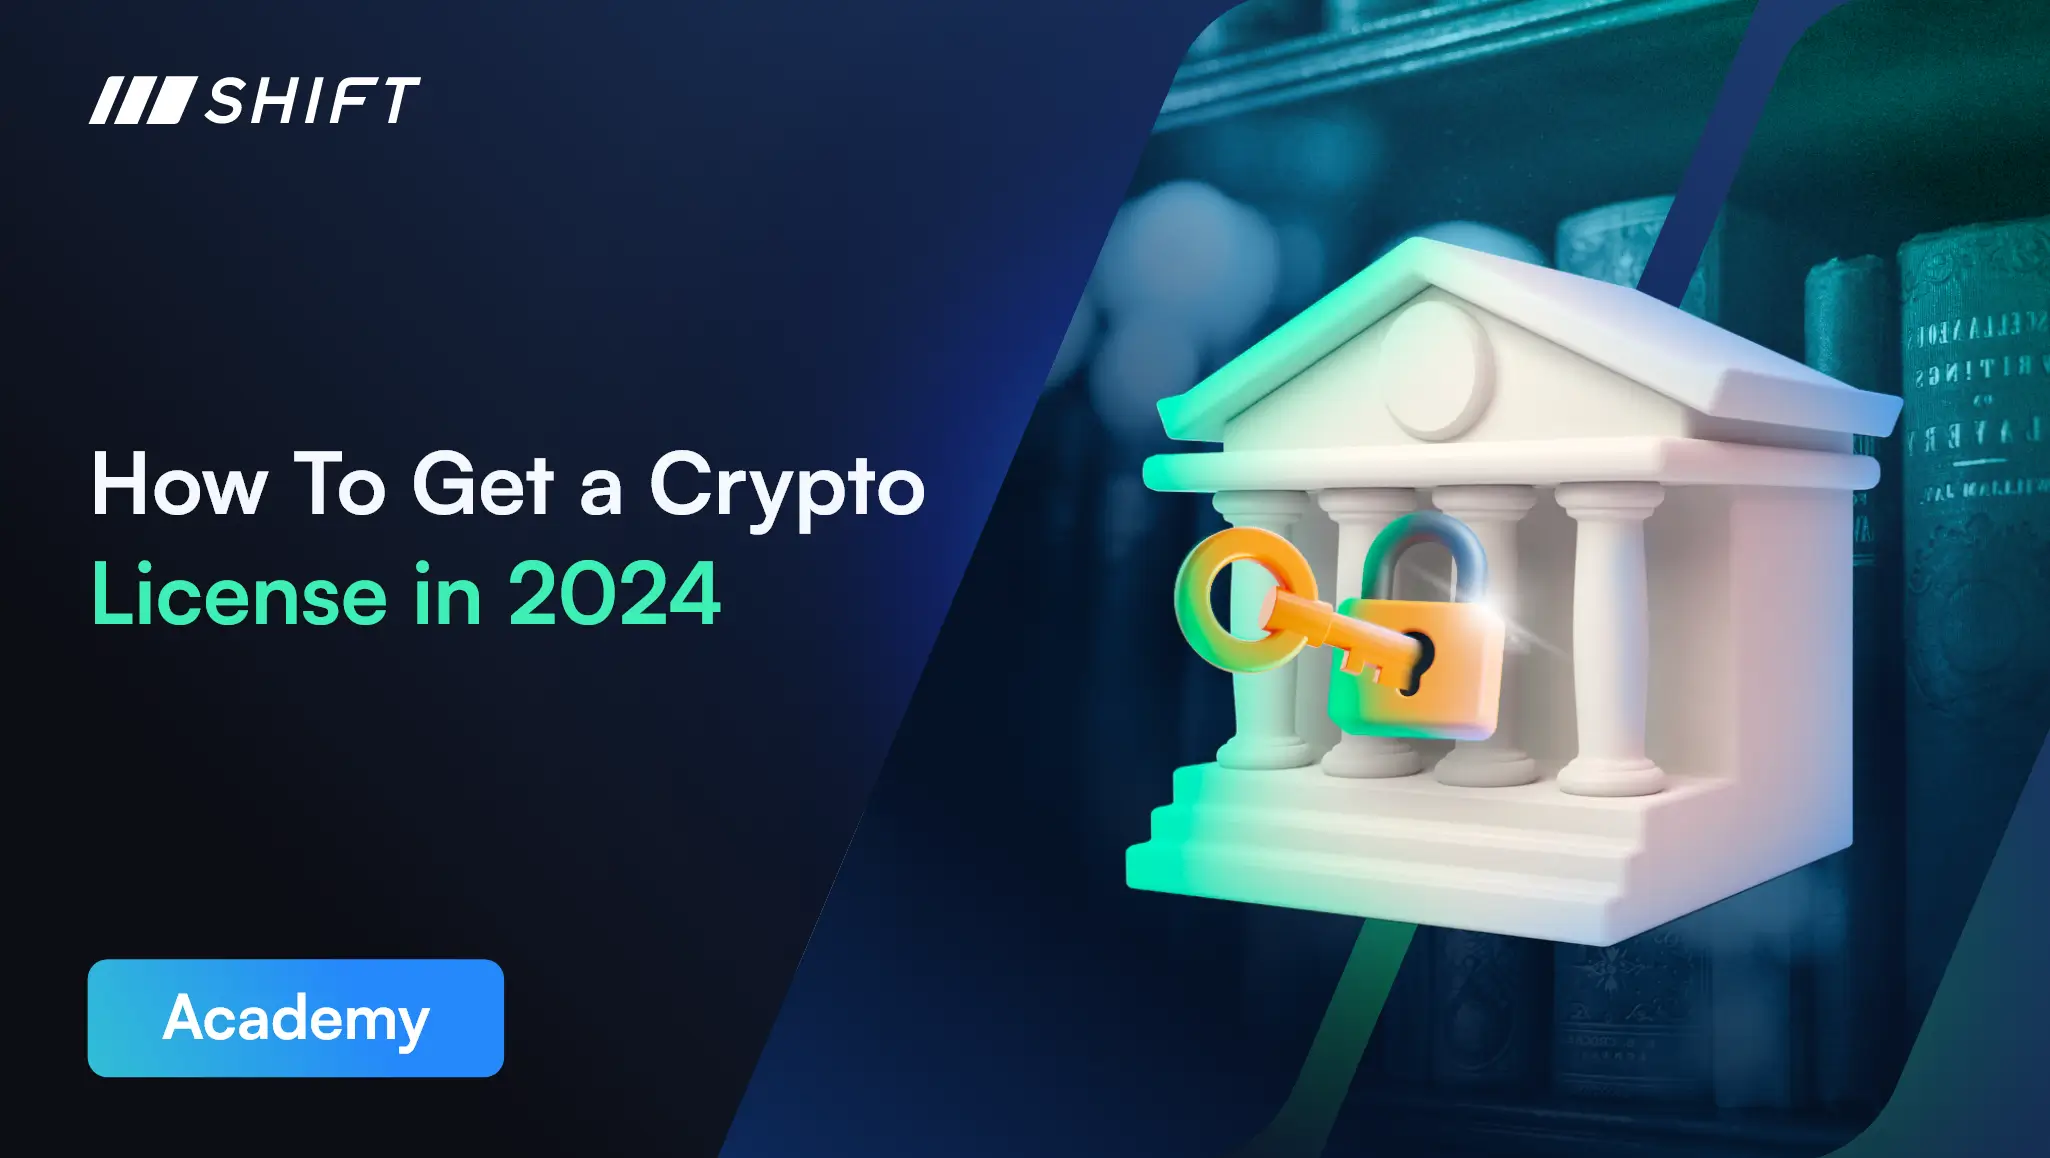 Learn how to get a crypto license in 2024 with Shift Markets.